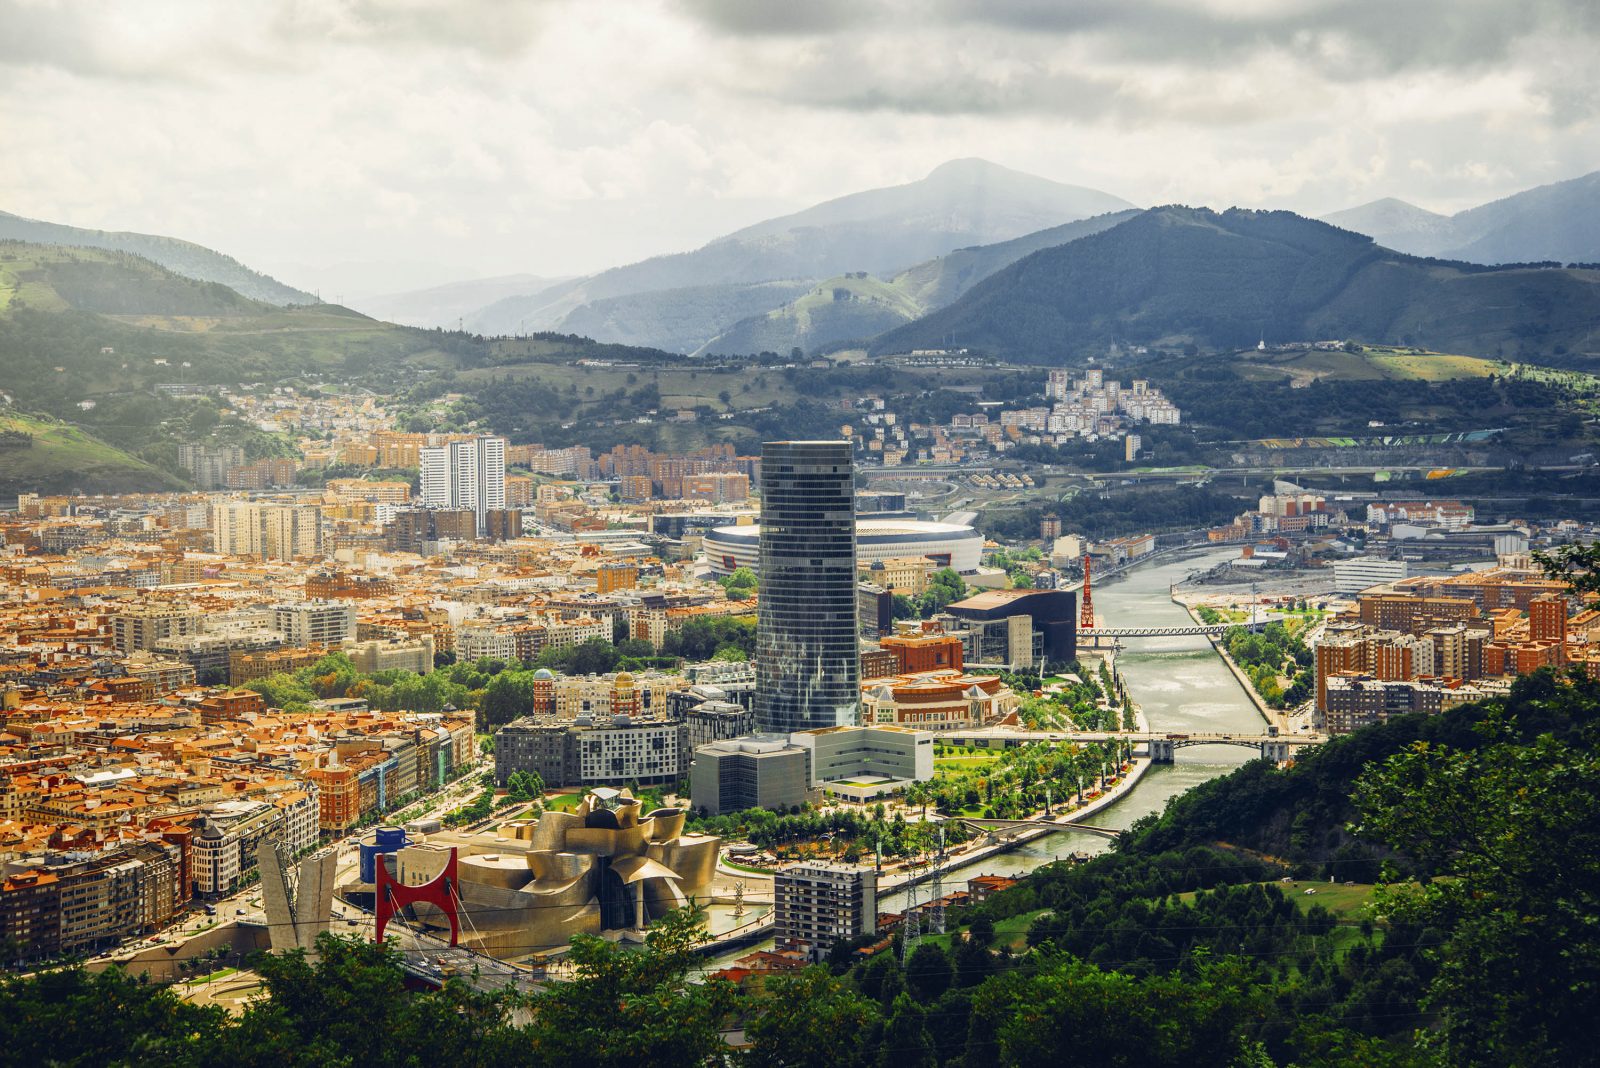 Landscape image of Bilboa, Spain, with buildings and landscape in the background.